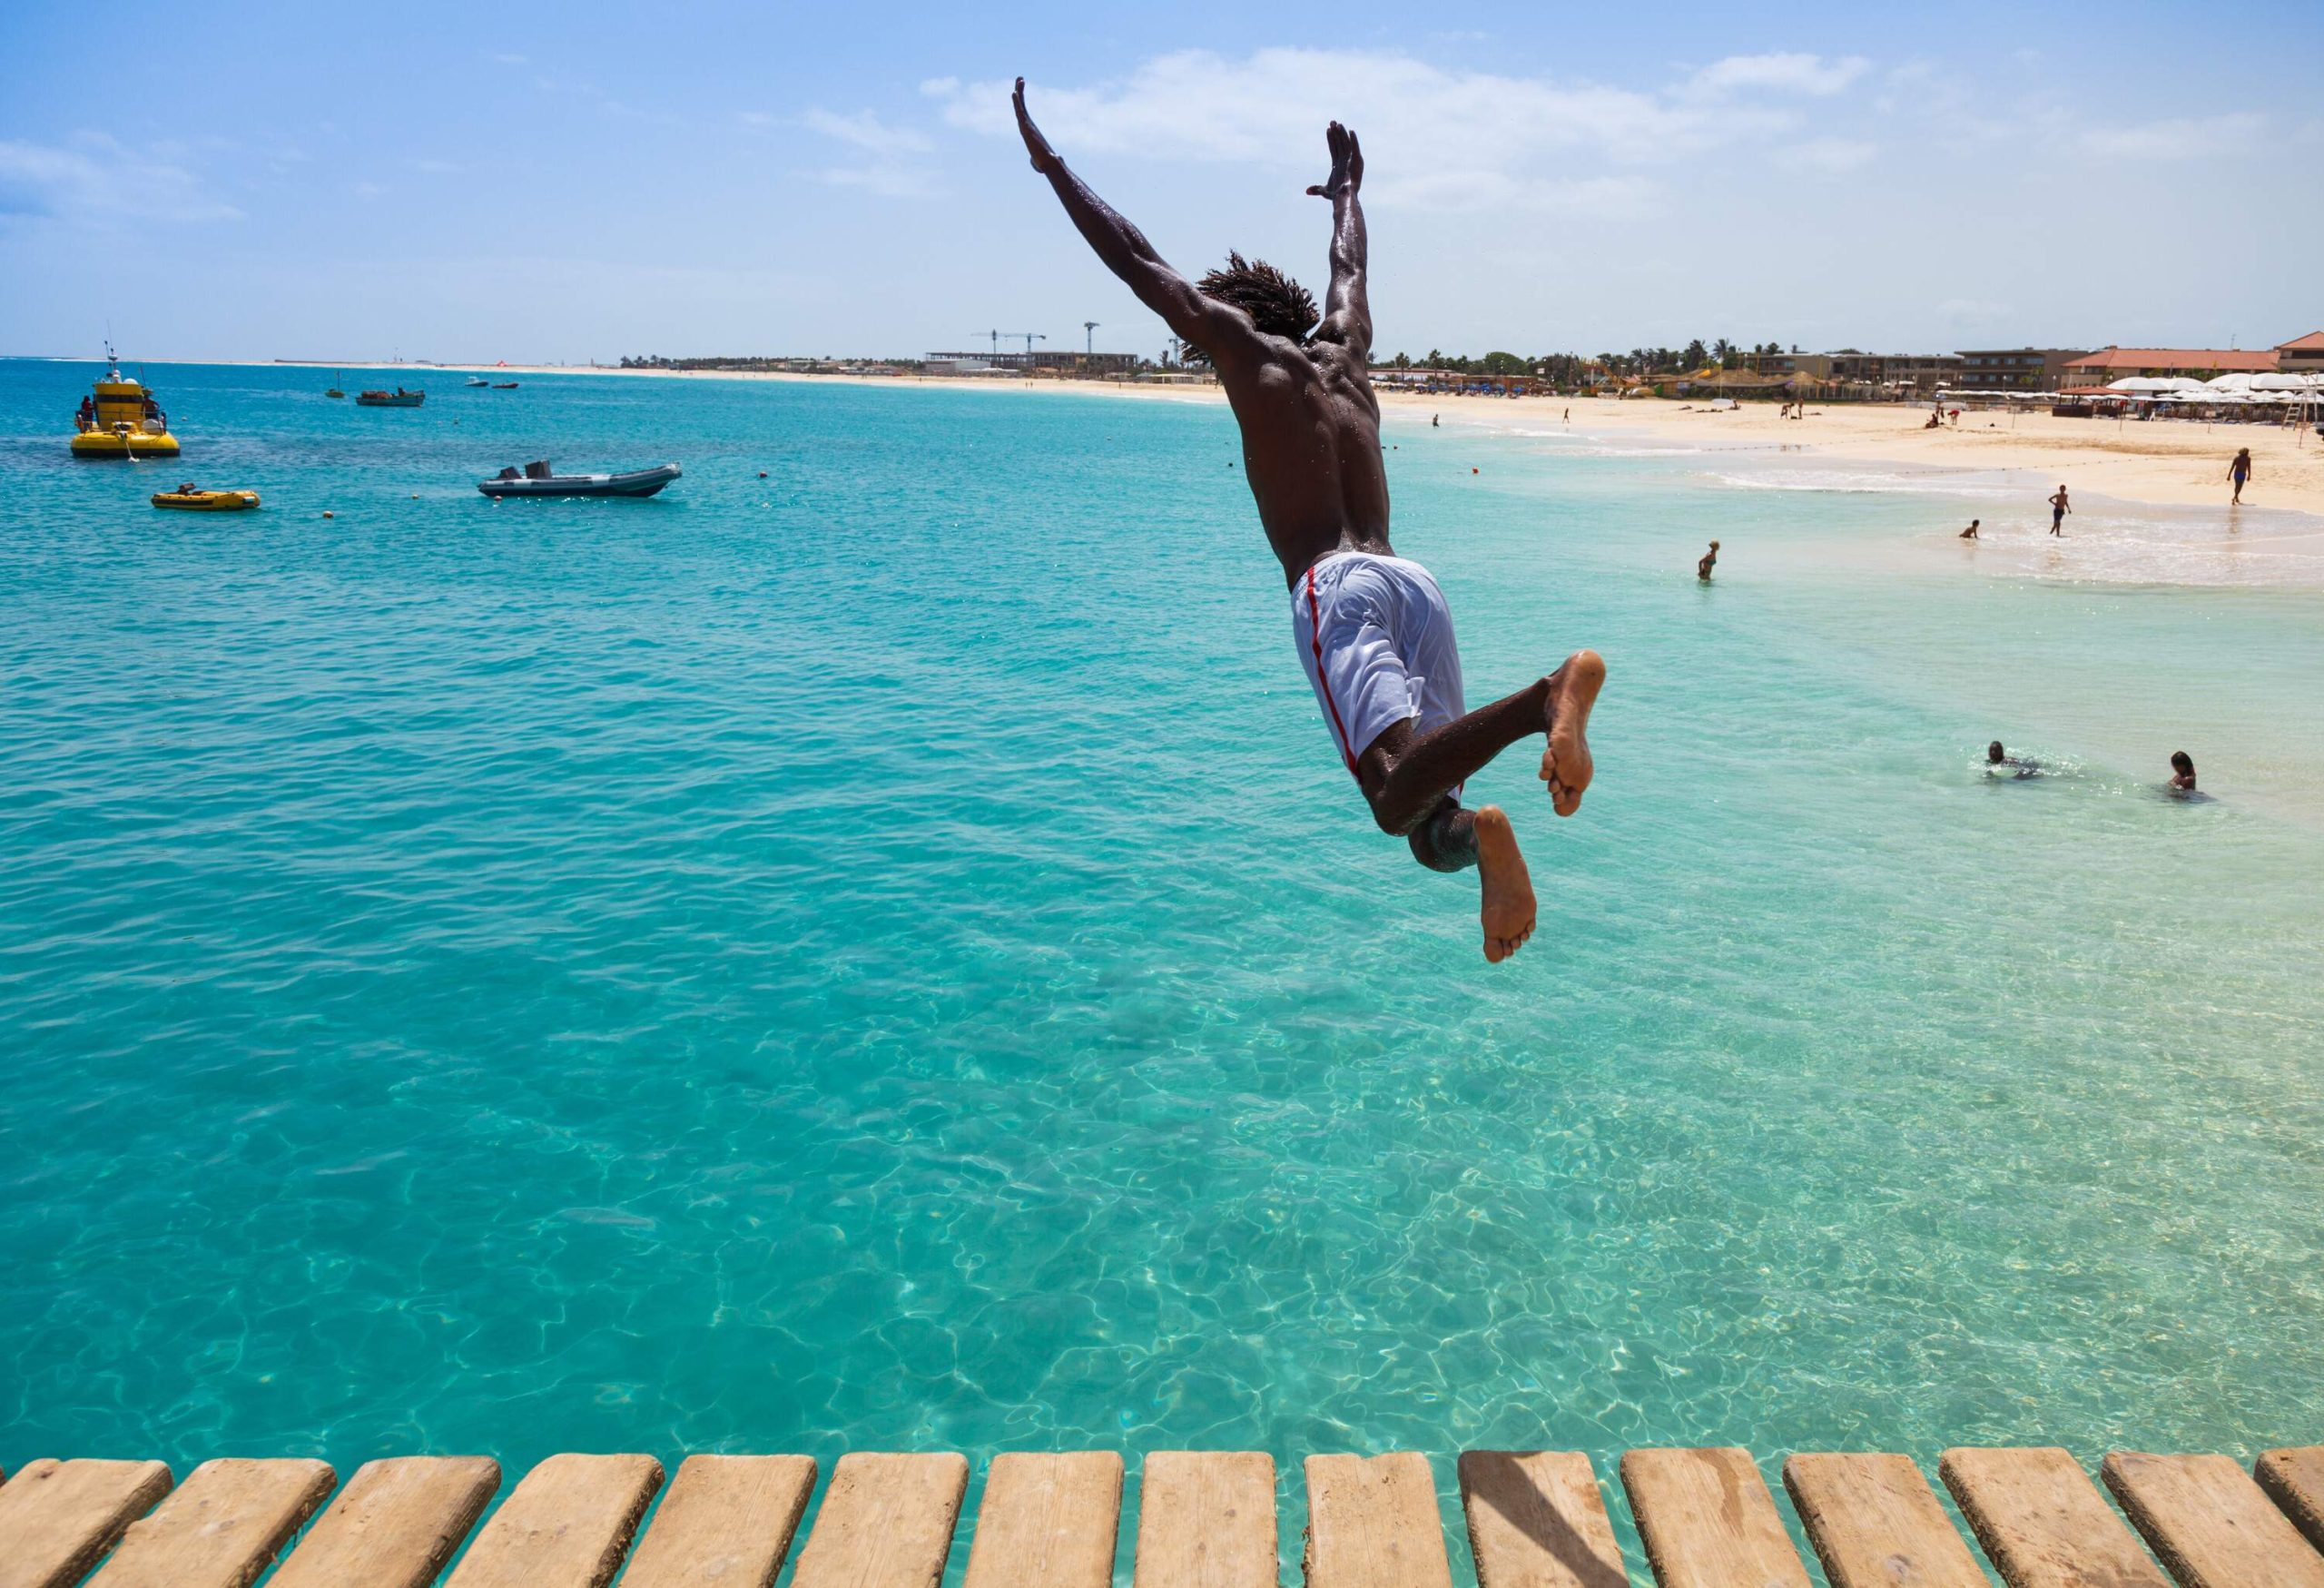 A man in boardshorts jumps into a beach's turquoise waters from a wooden pier.